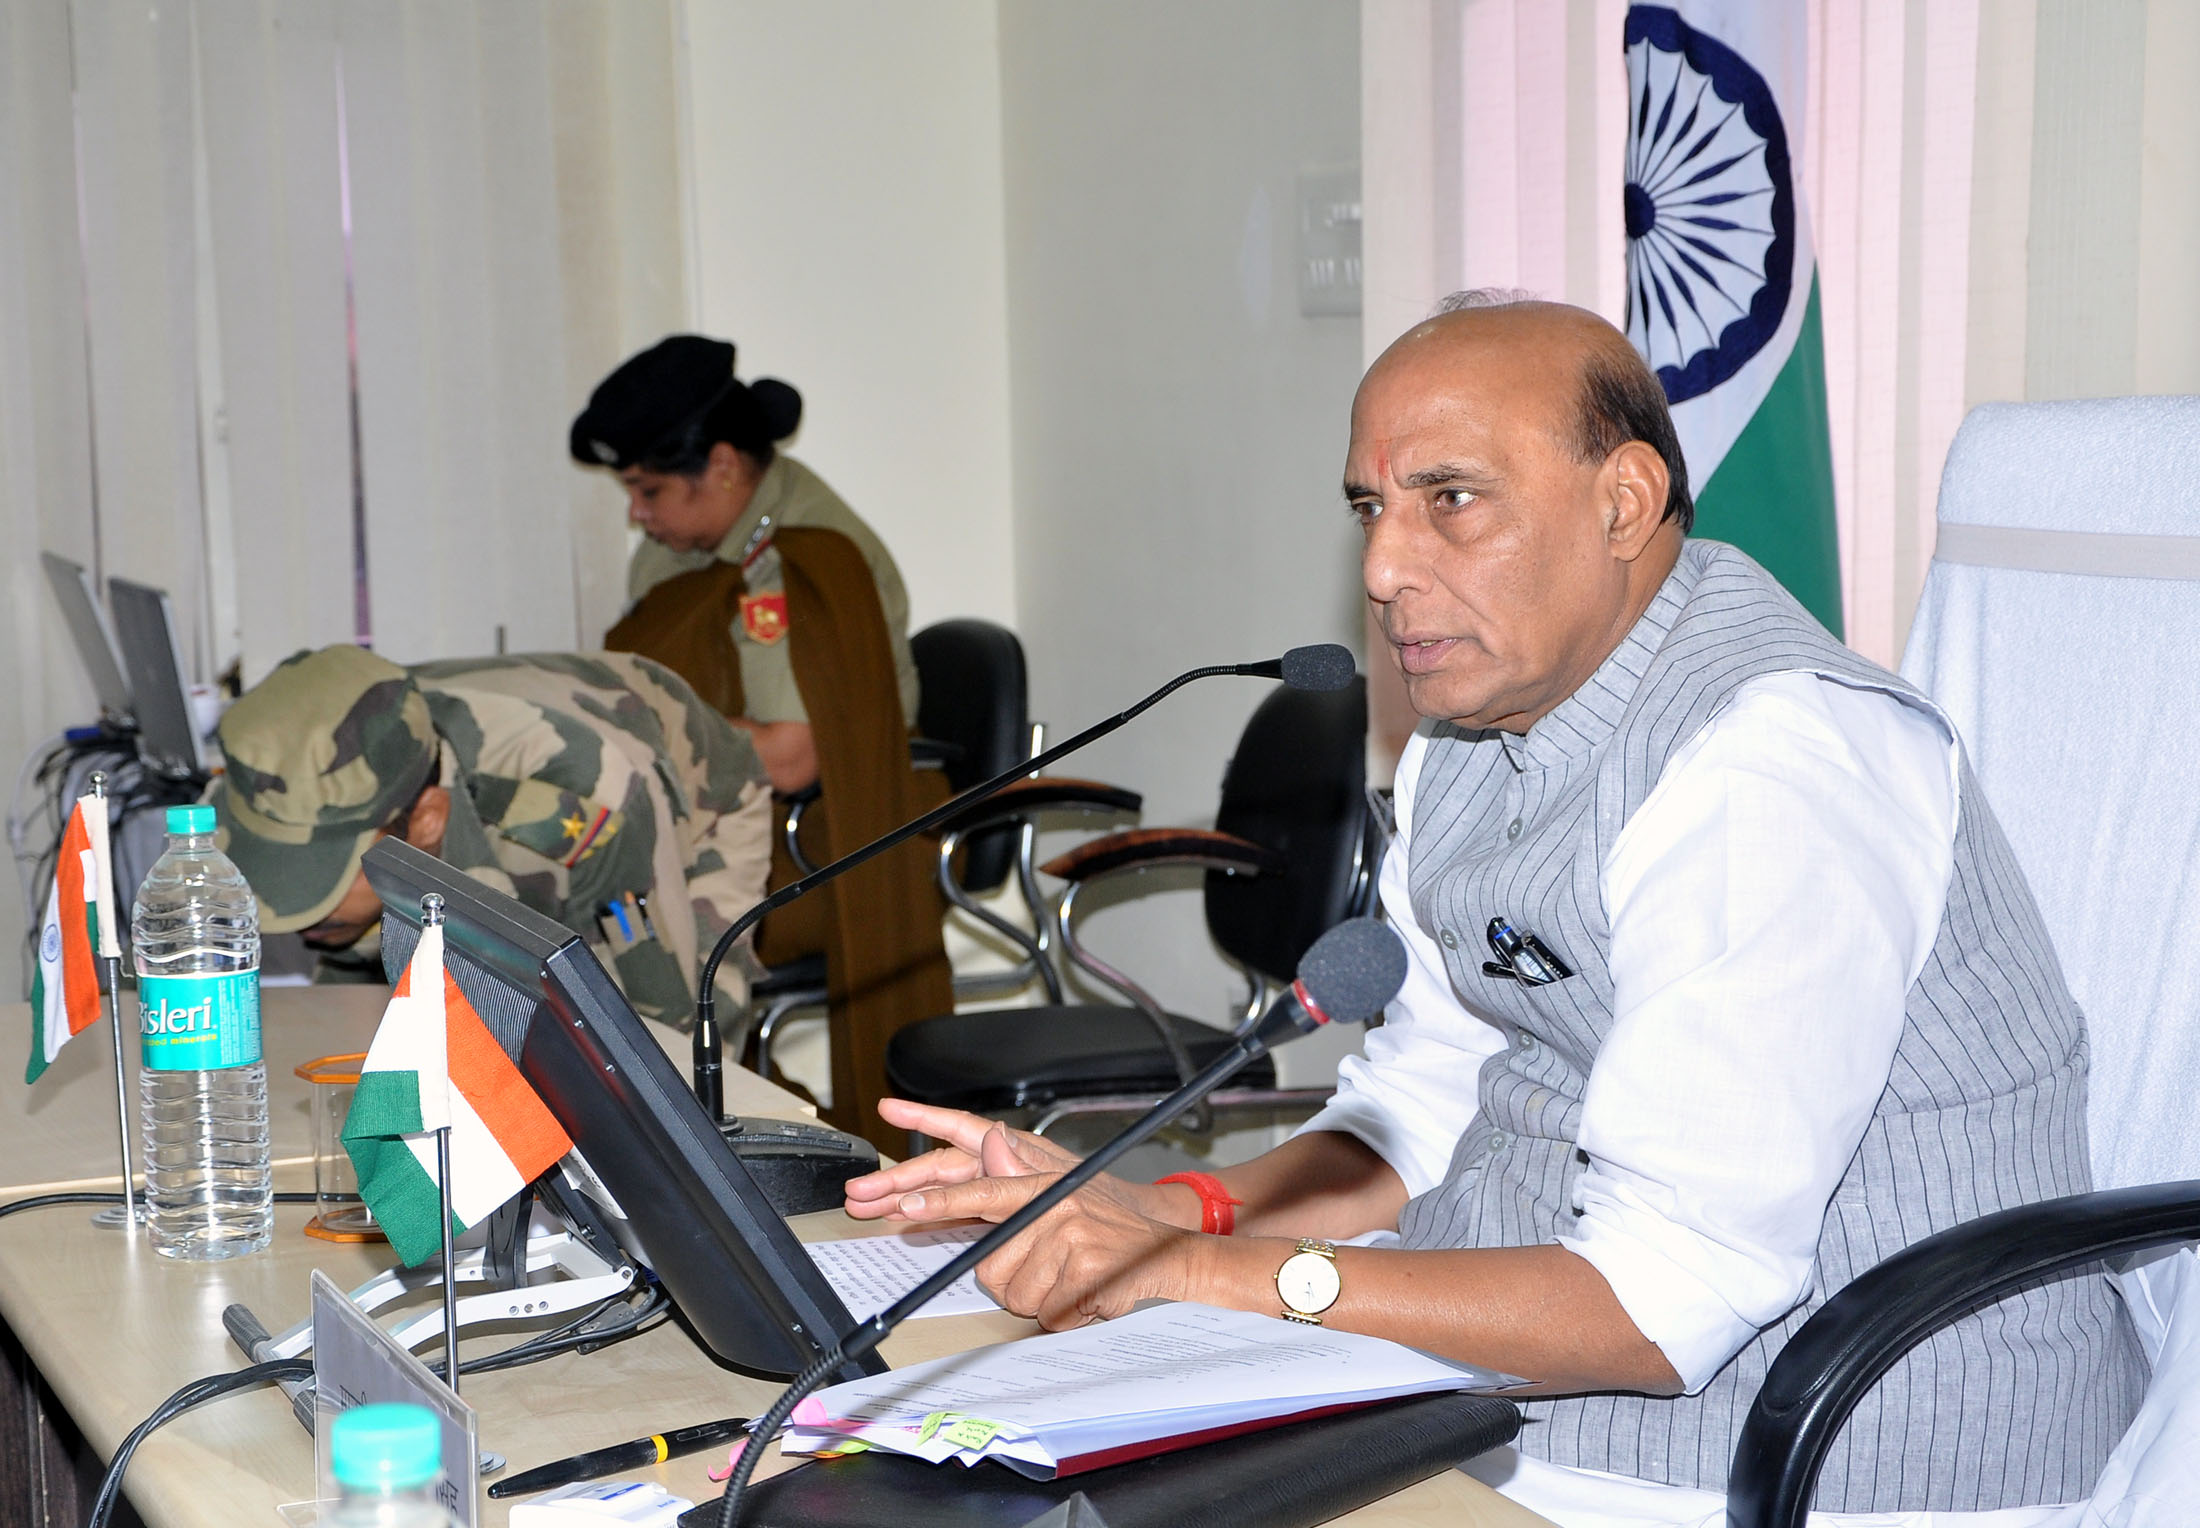 The Union Home Minister, Shri Rajnath Singh chairing a meeting with the Chief Ministers/ Home Ministers of Rajasthan, Gujarat, Punjab & J&K for sealing of Indo-Pak border, in Jaisalmer on October 07, 2016.